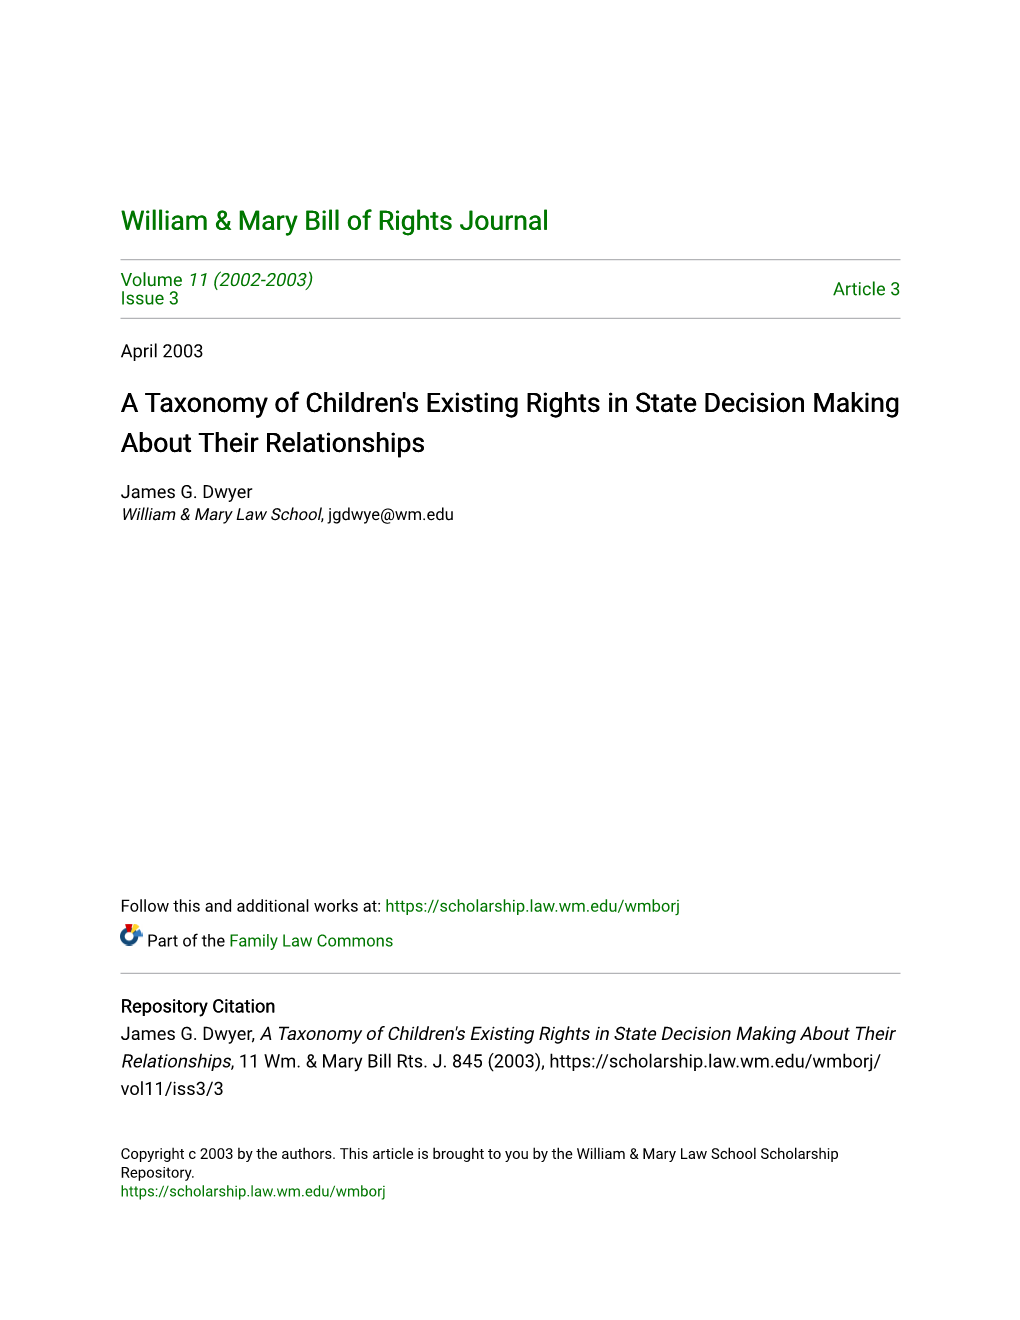 A Taxonomy of Children's Existing Rights in State Decision Making About Their Relationships